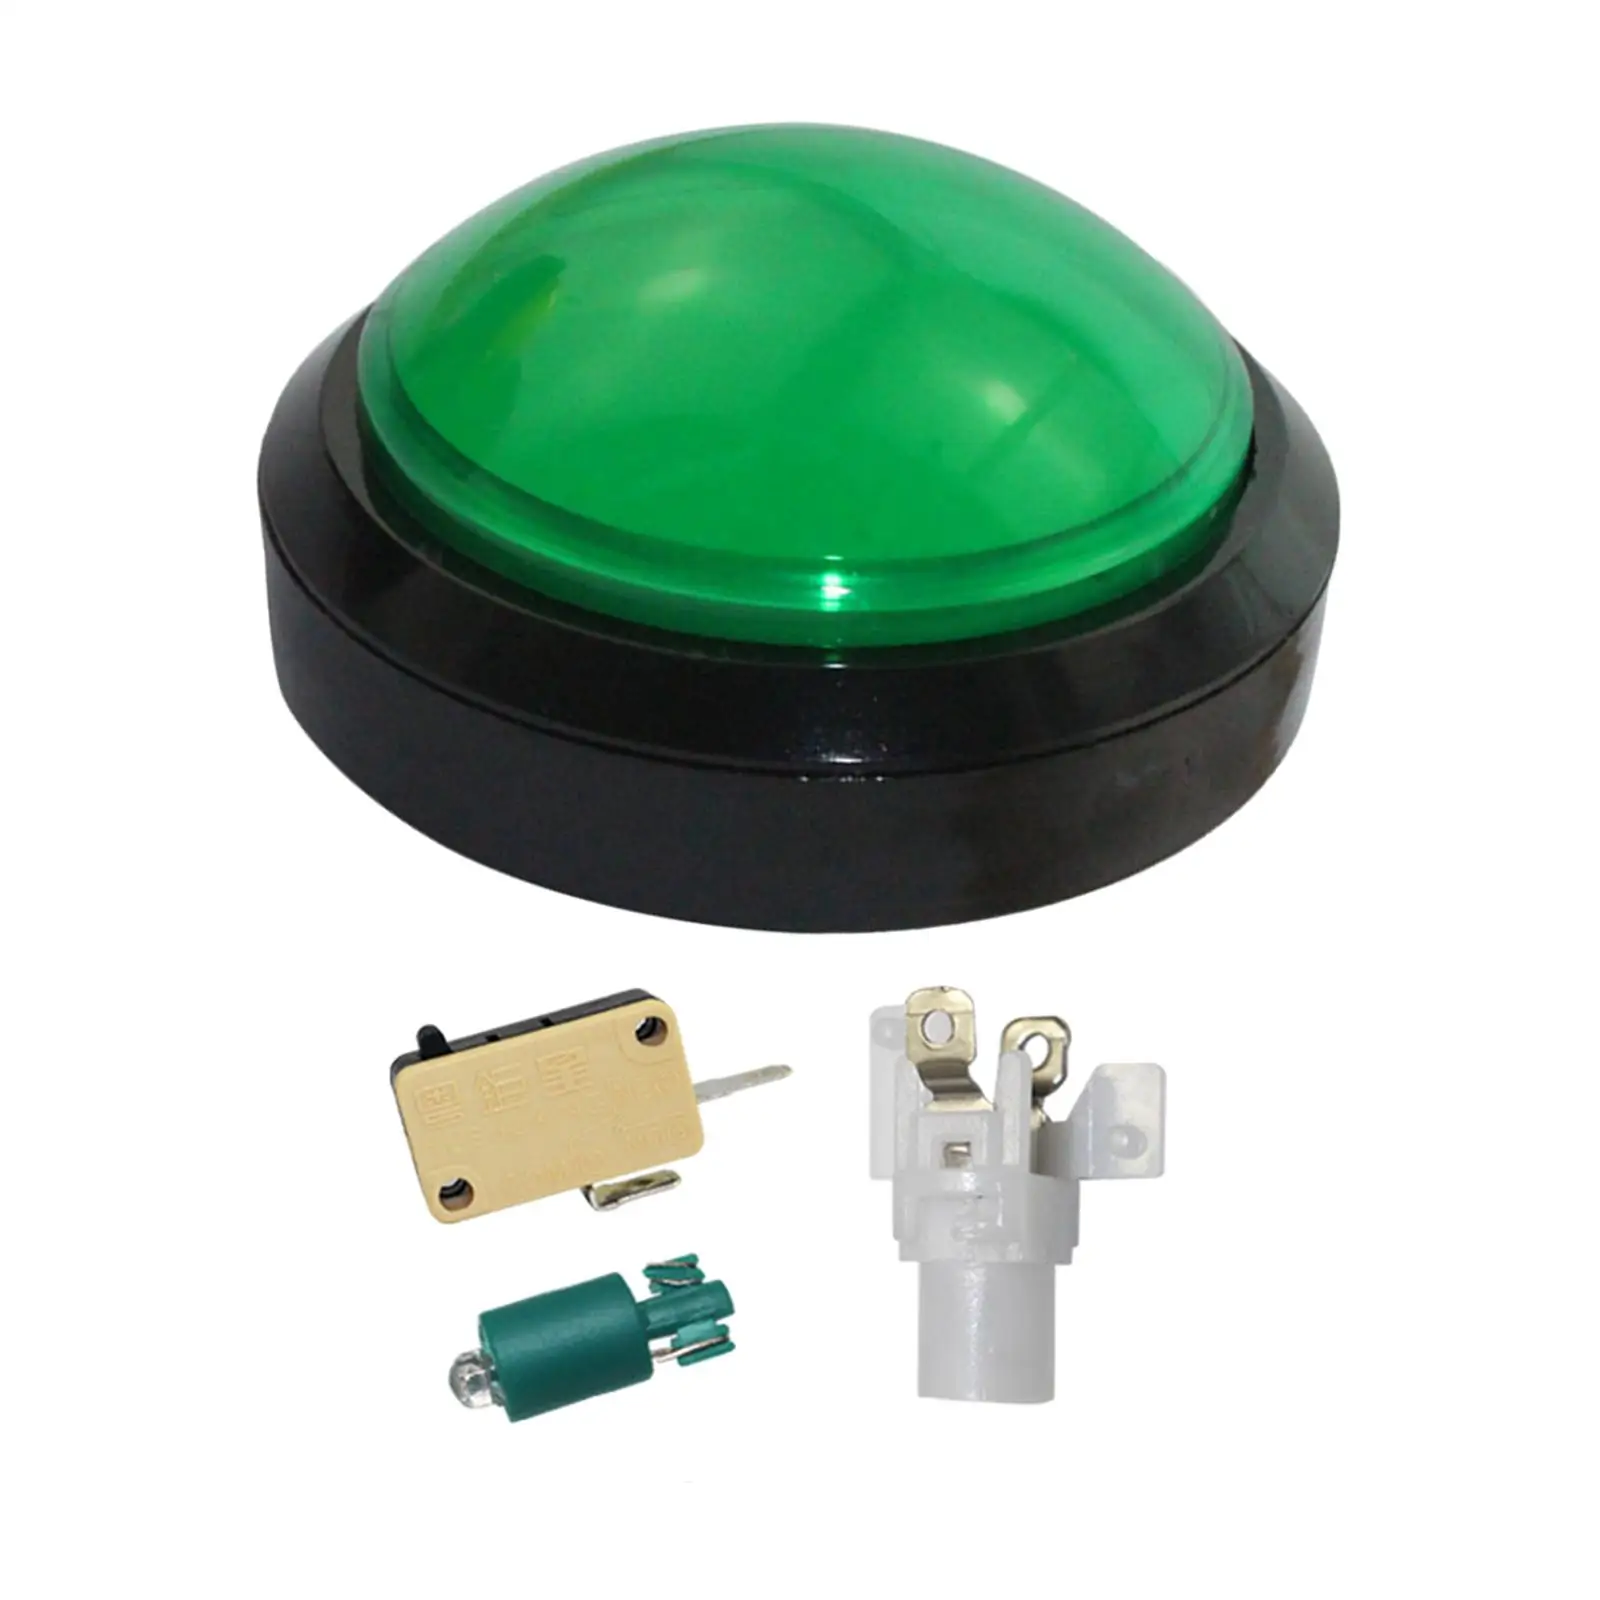 100mm LED Push Button, Accessories for Arcade Machine  Replaces